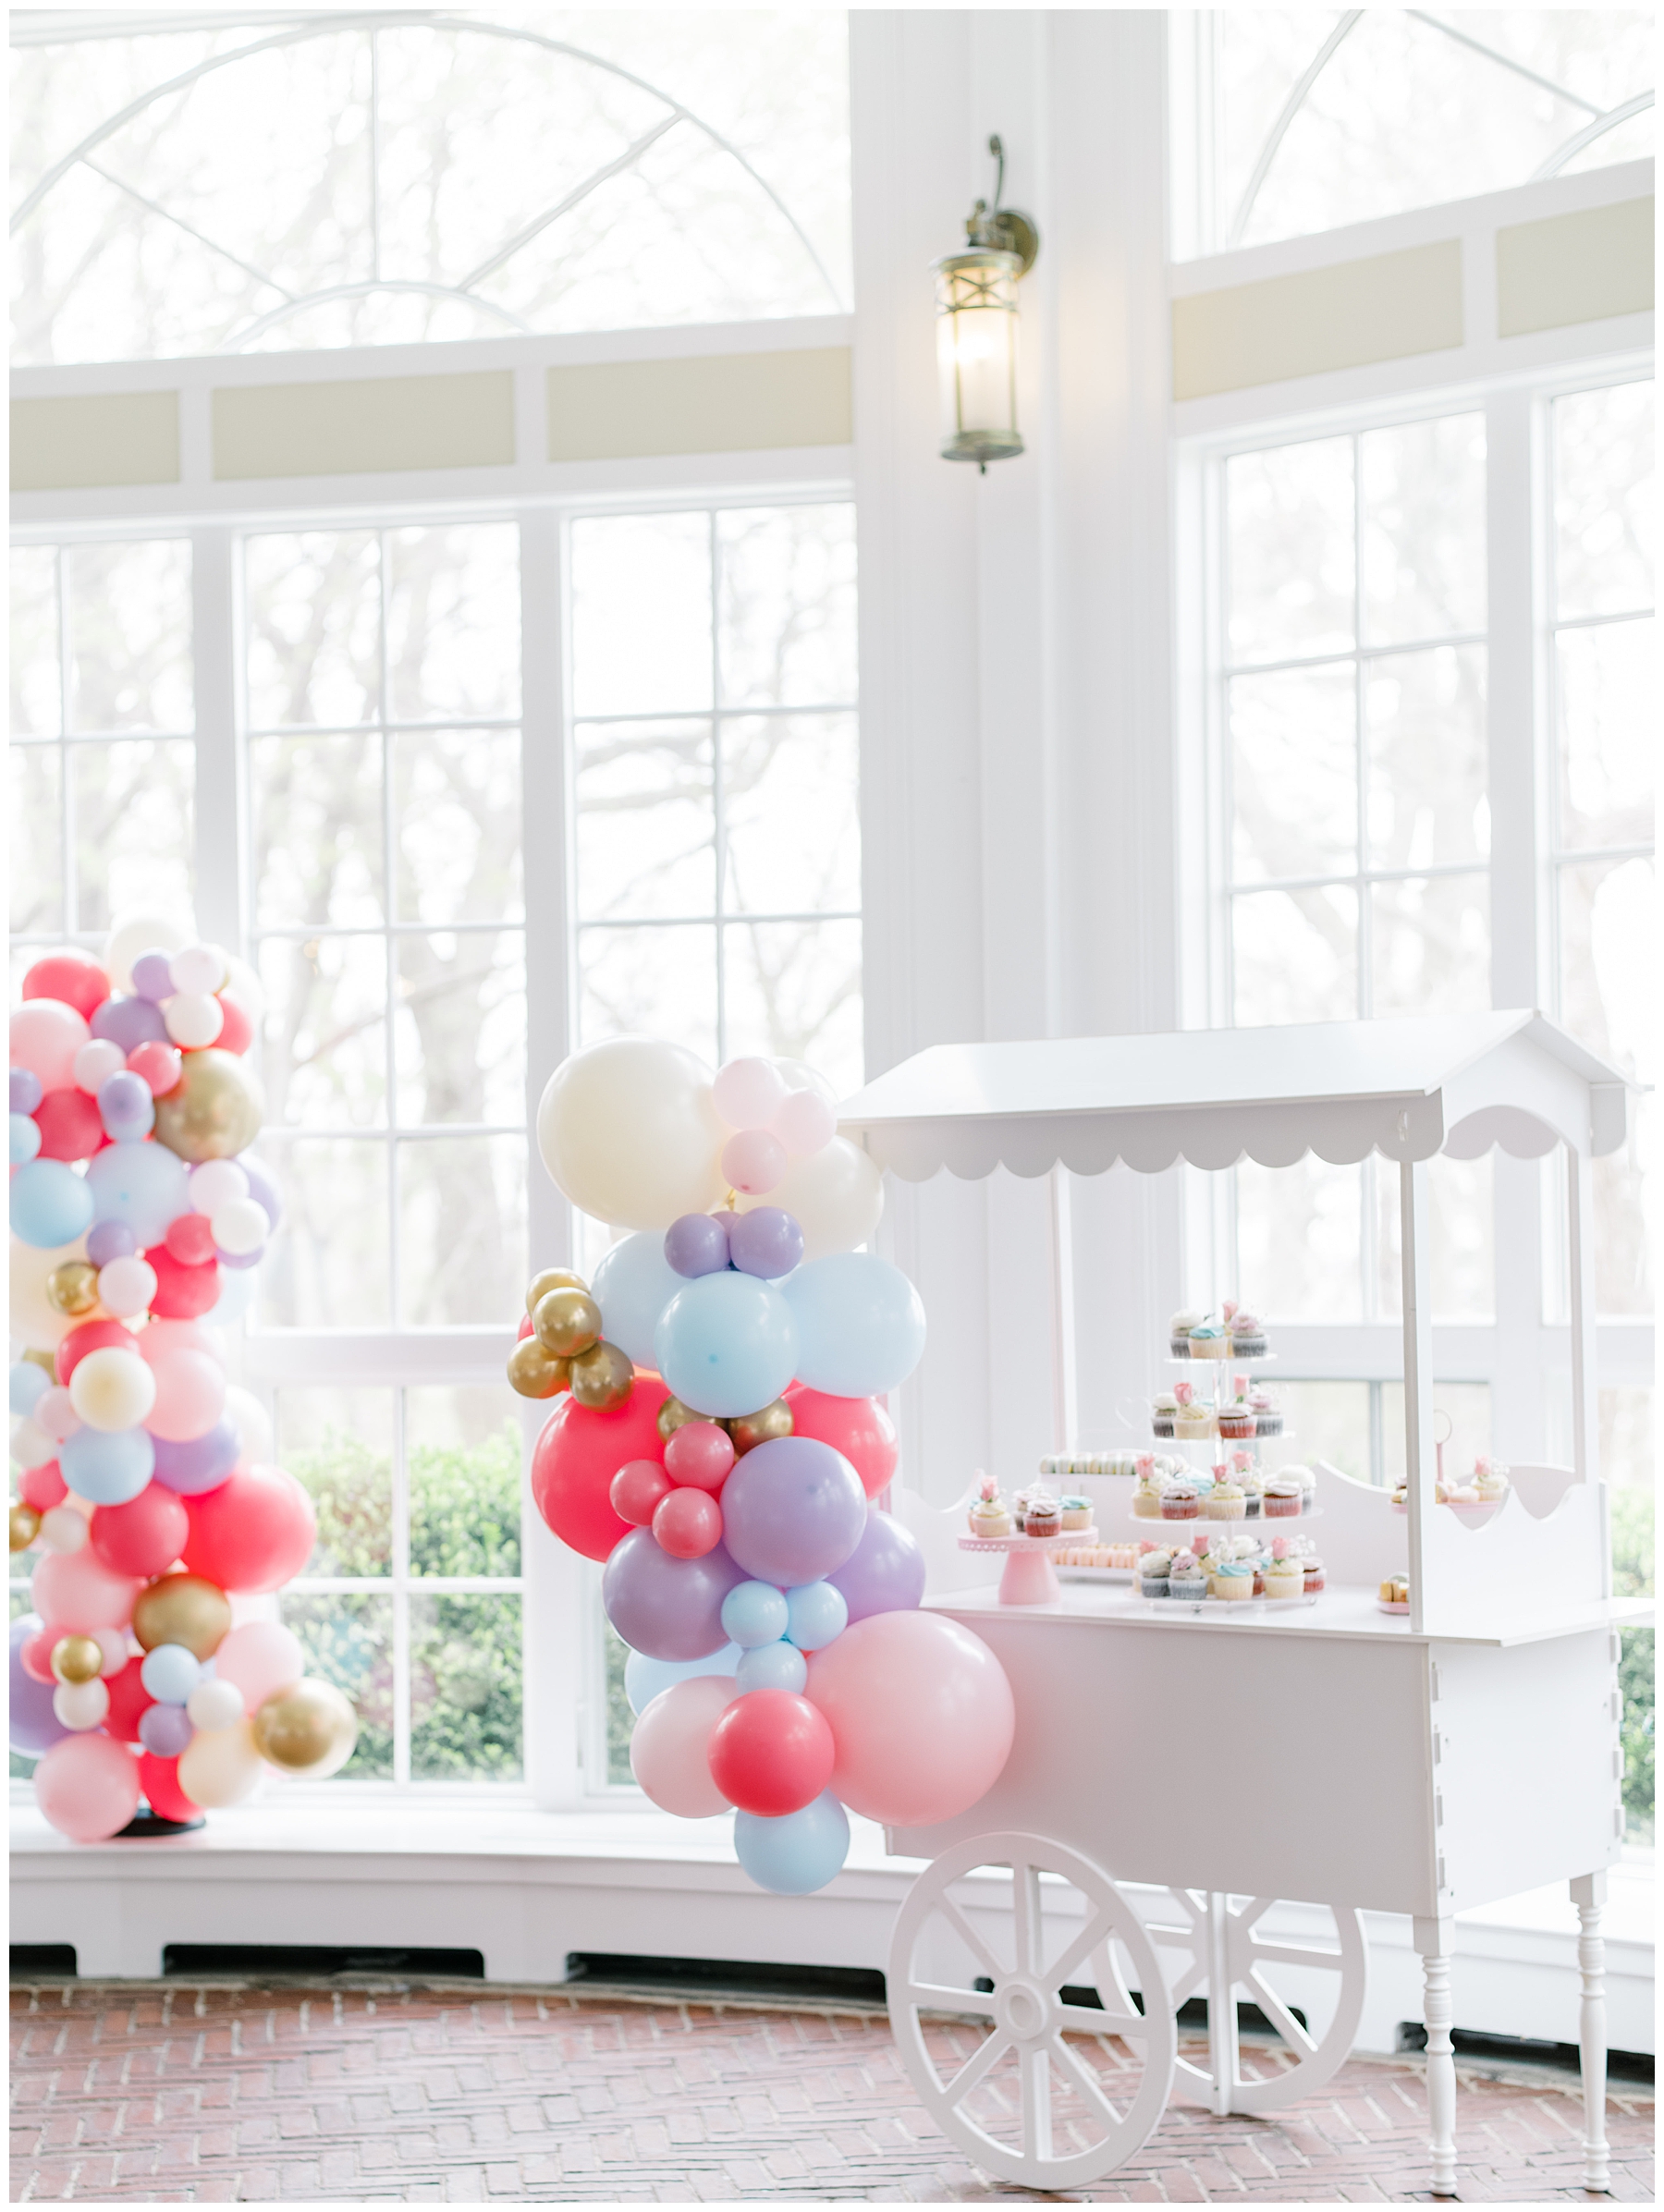 cupcake cart with decorated with colorful balloons